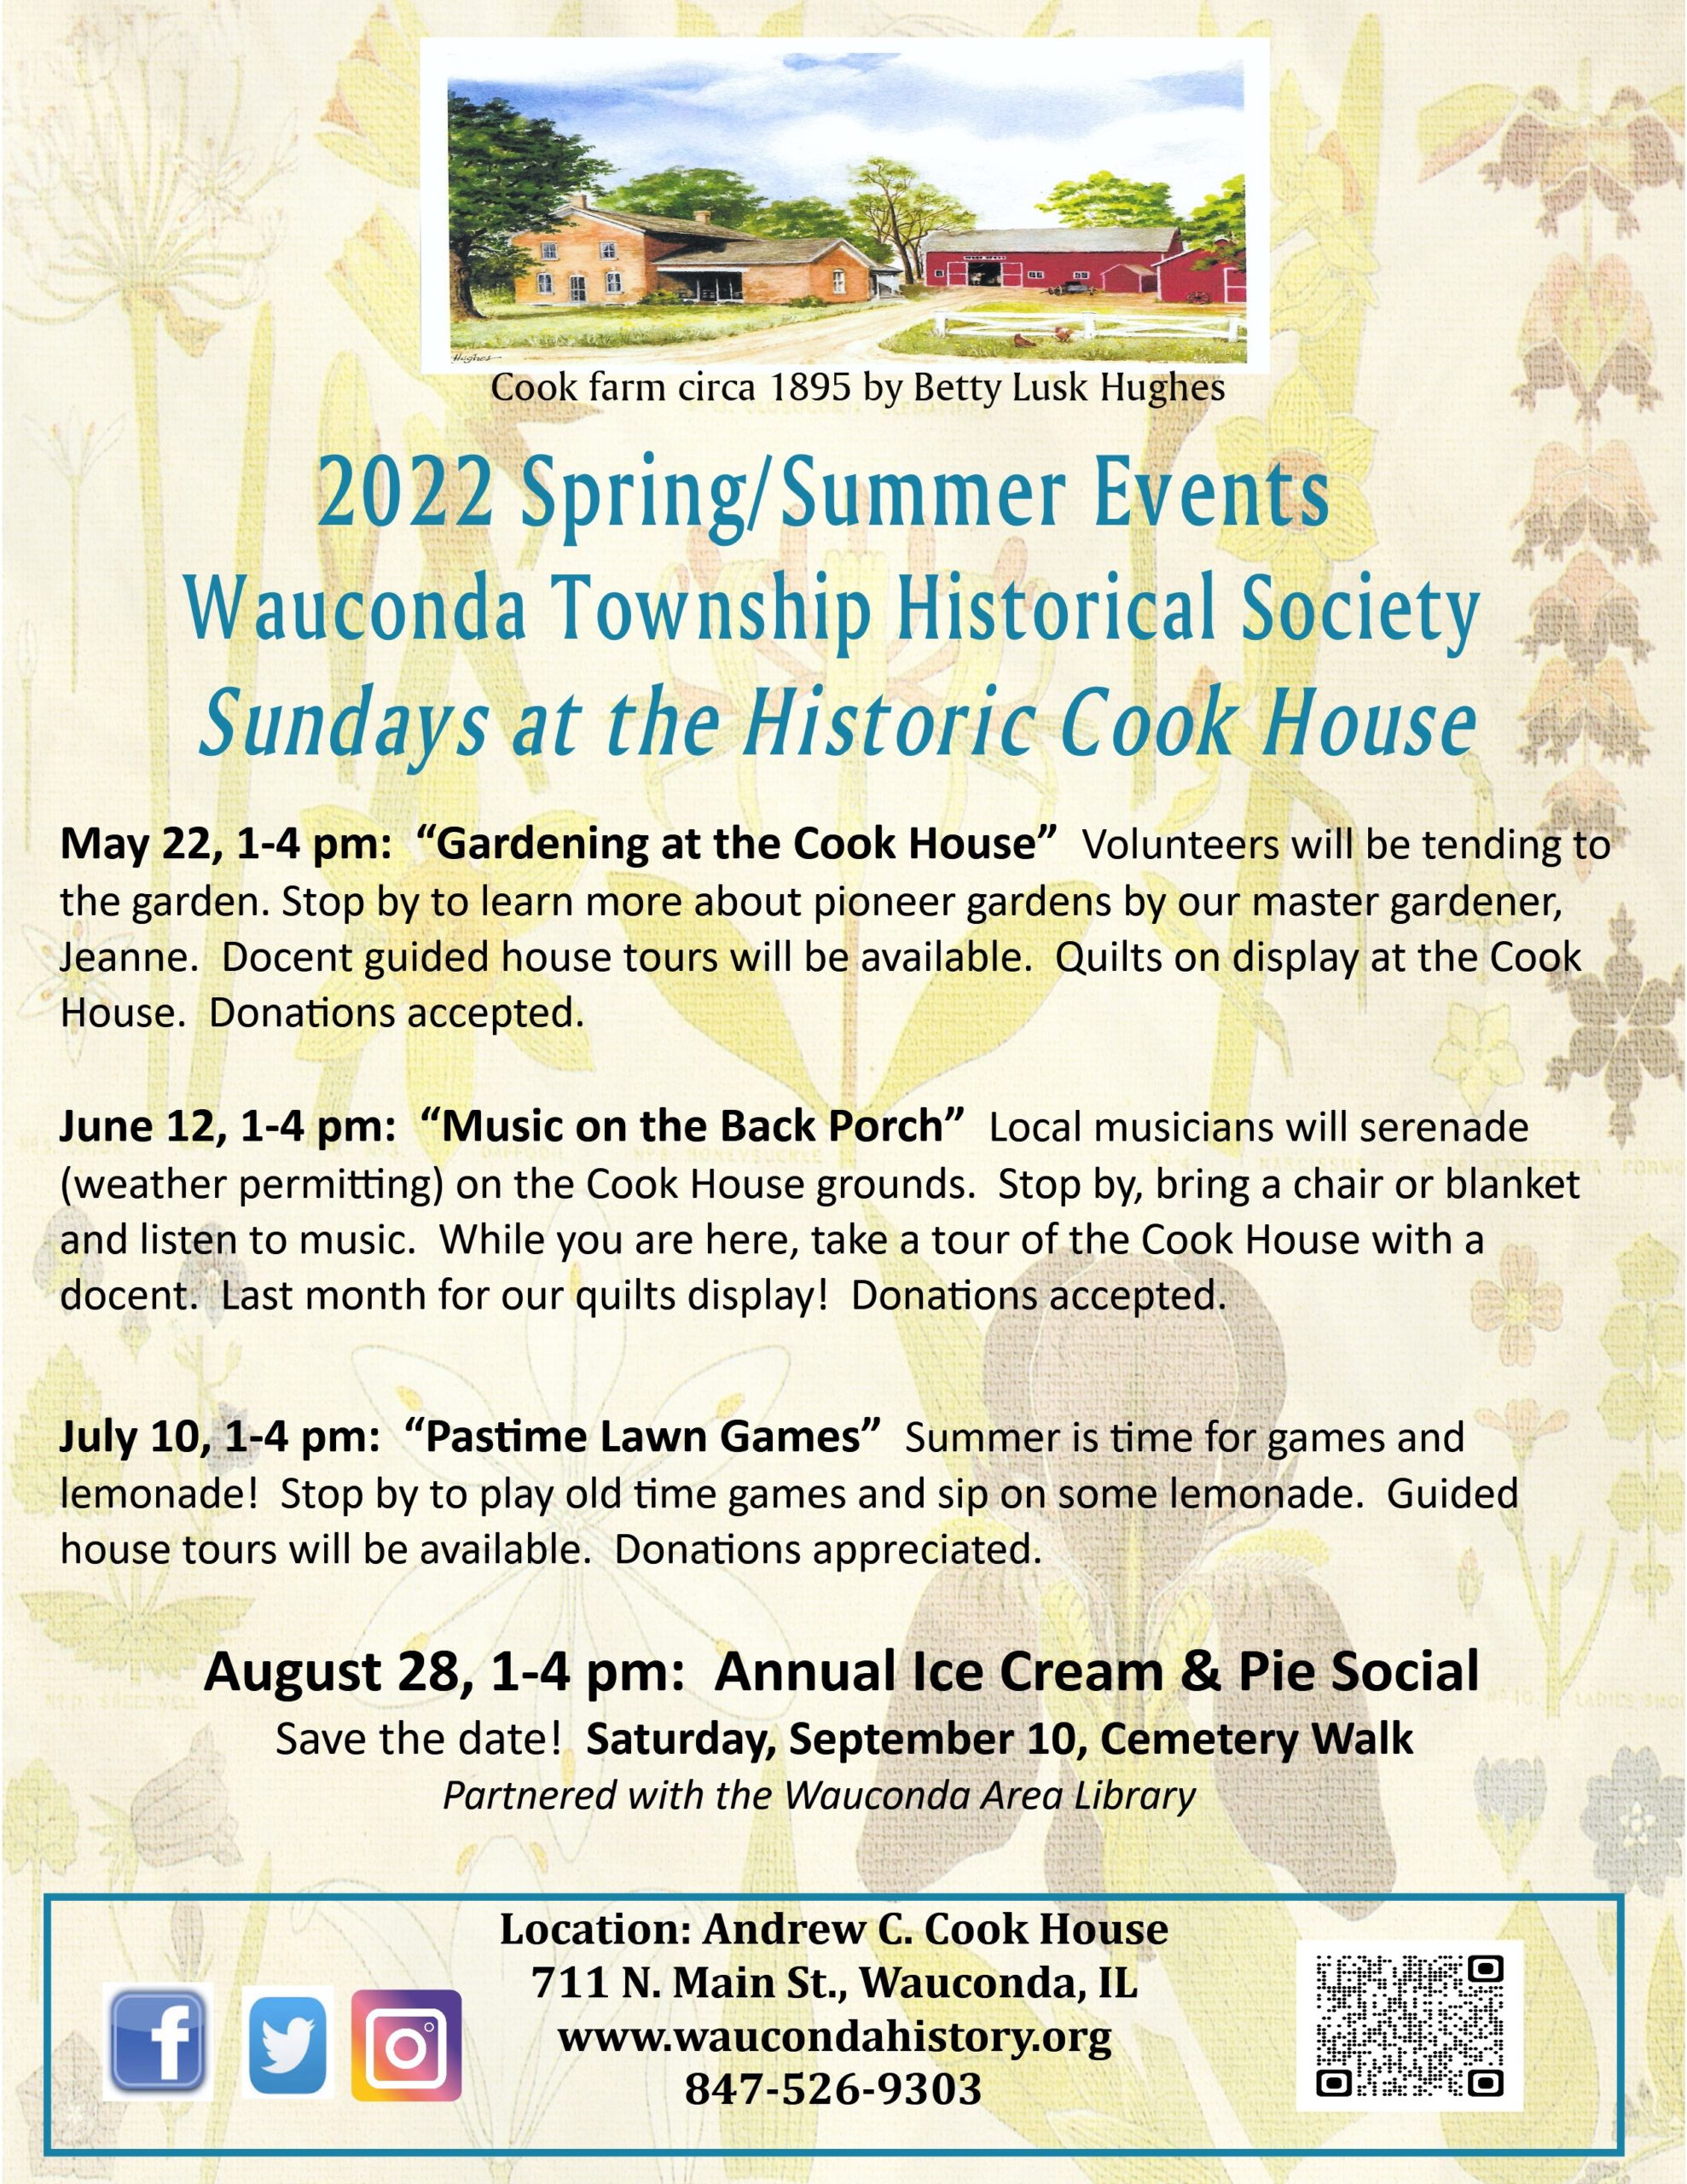 Wauconda Township Historical Society | Engage, Educate, Enrich